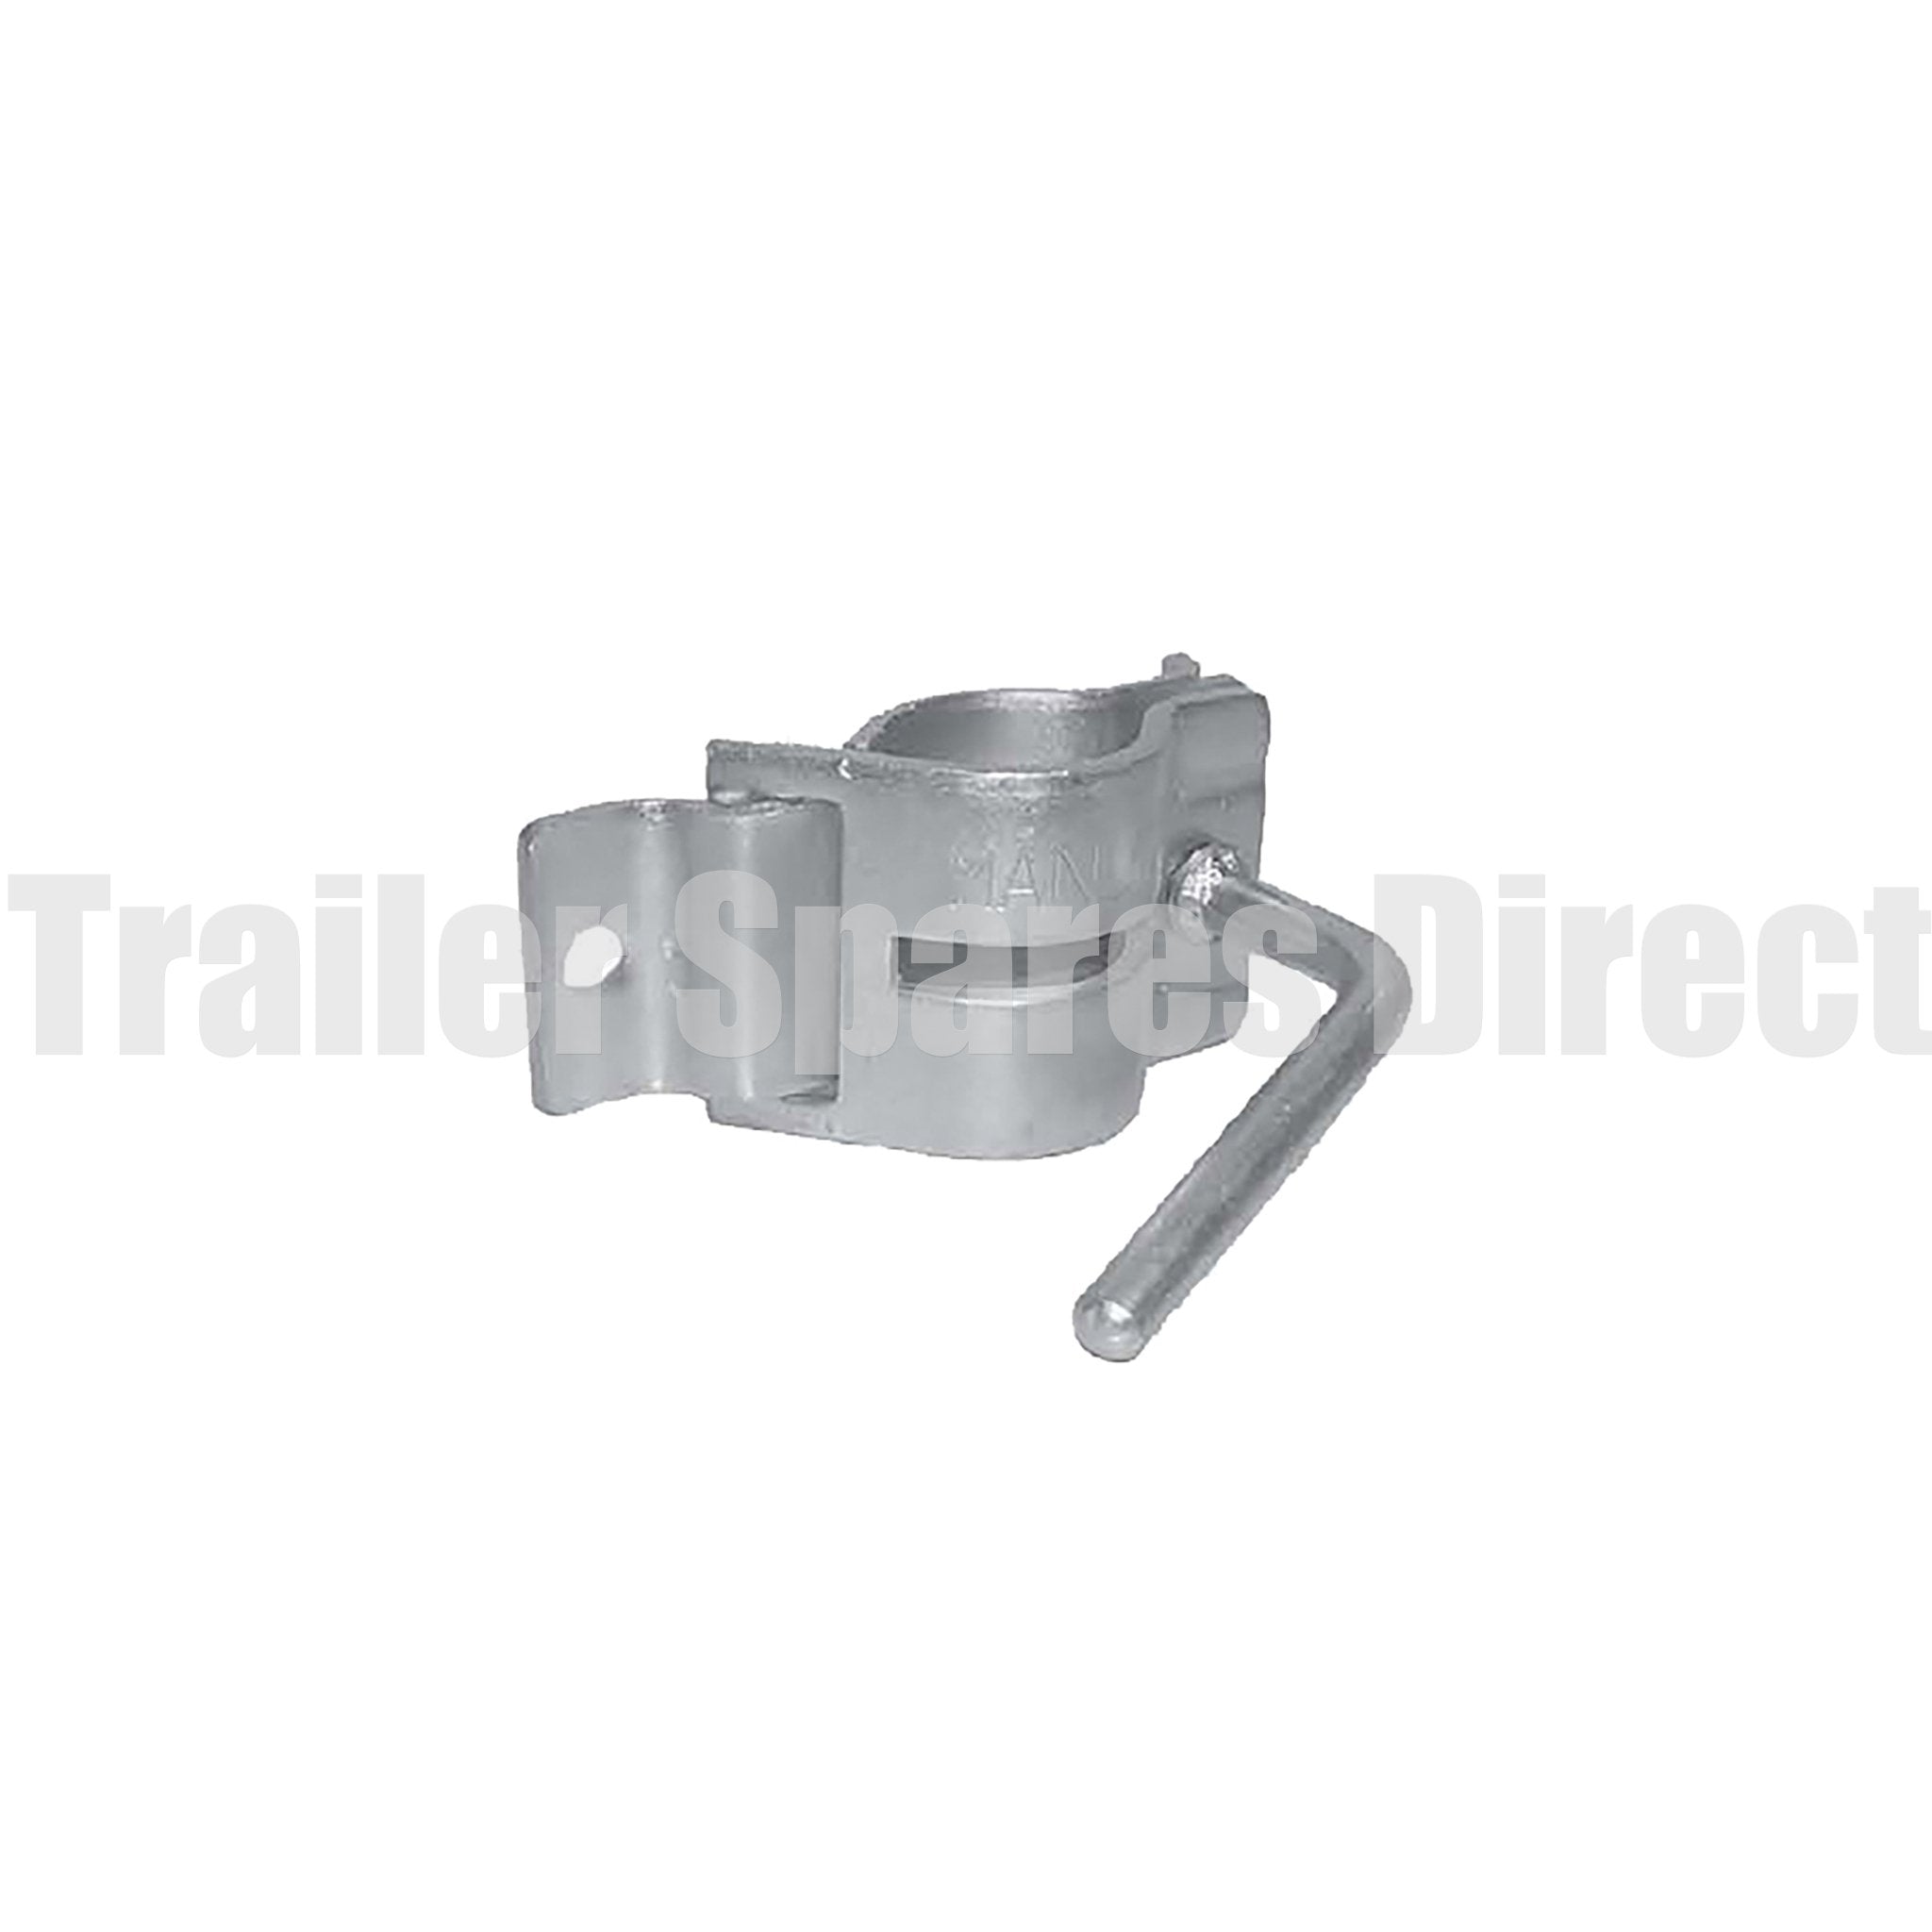 Clamp for support wheel or stand leg - Replacement and attachment